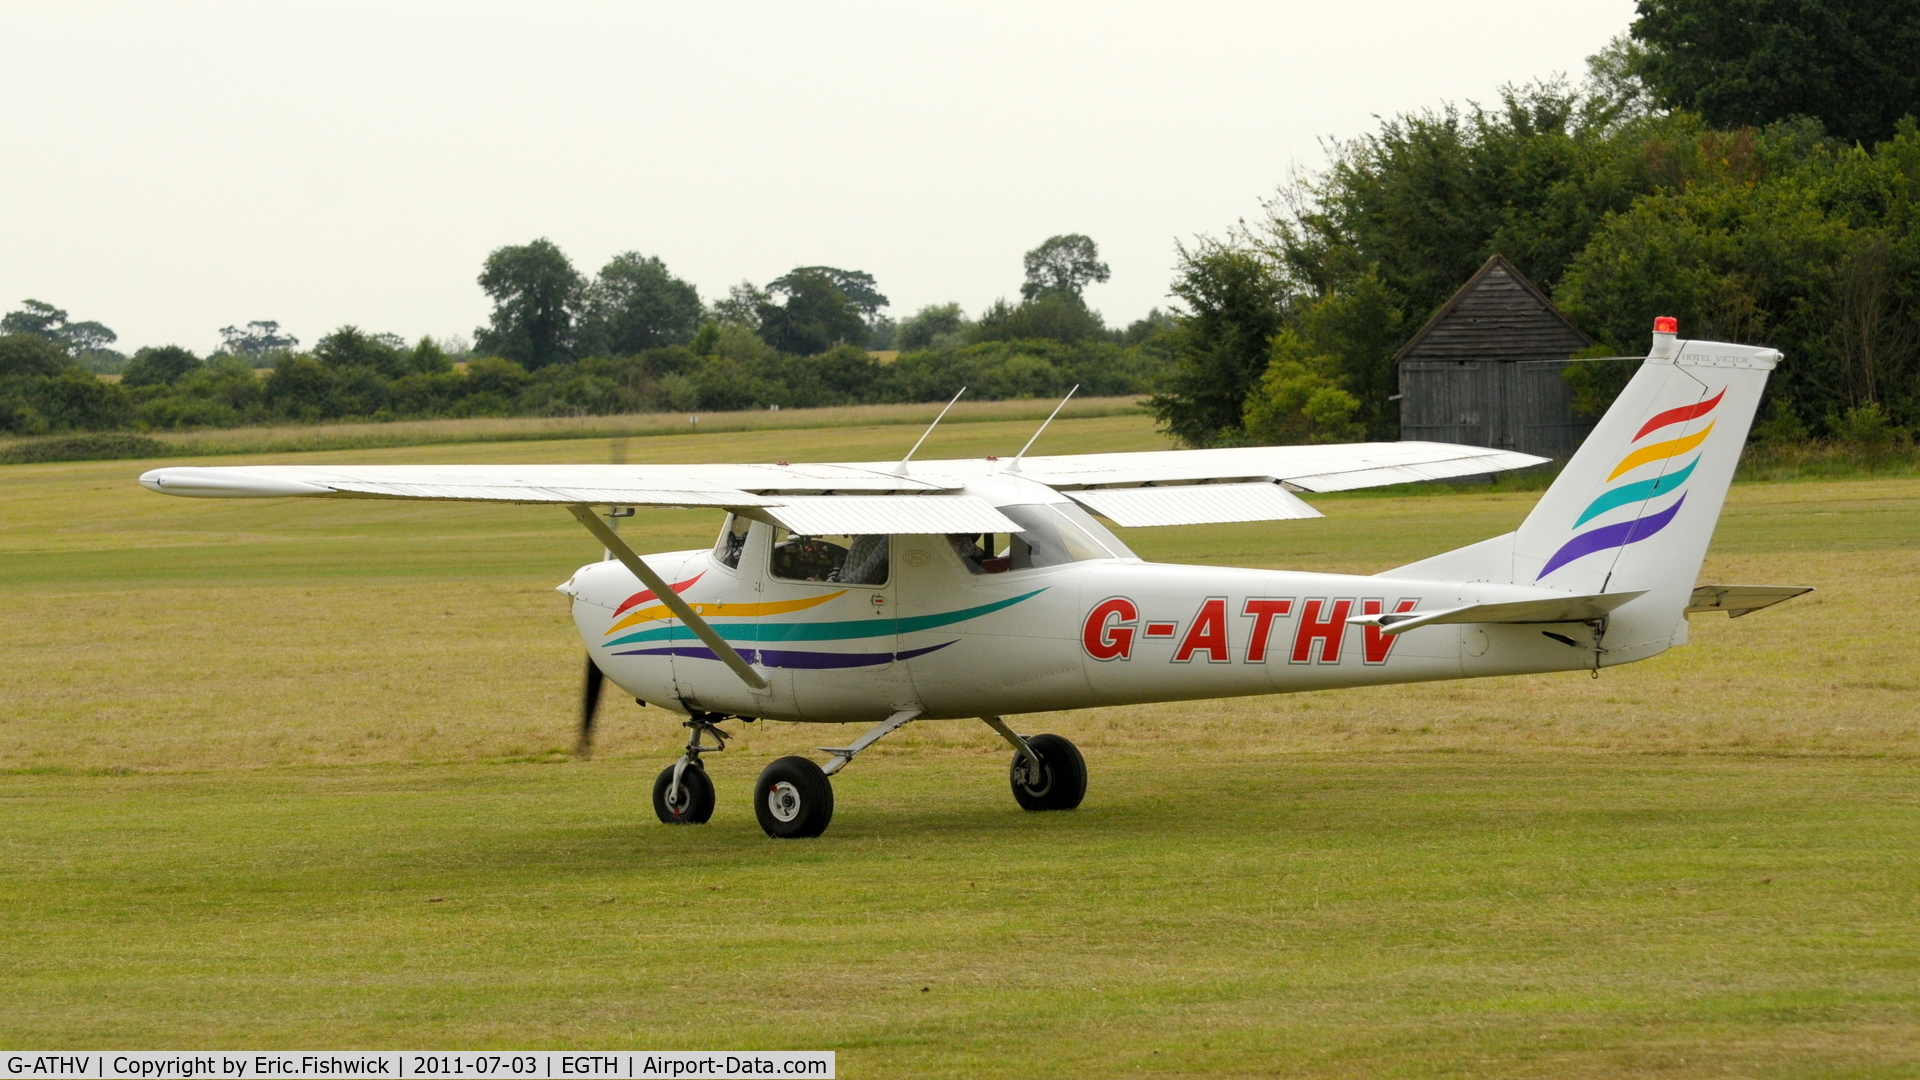 G-ATHV, 1966 Cessna 150F C/N 150-62019, 1. G-ATHV at Shuttleworth Military Pagent Air Display, July 2011